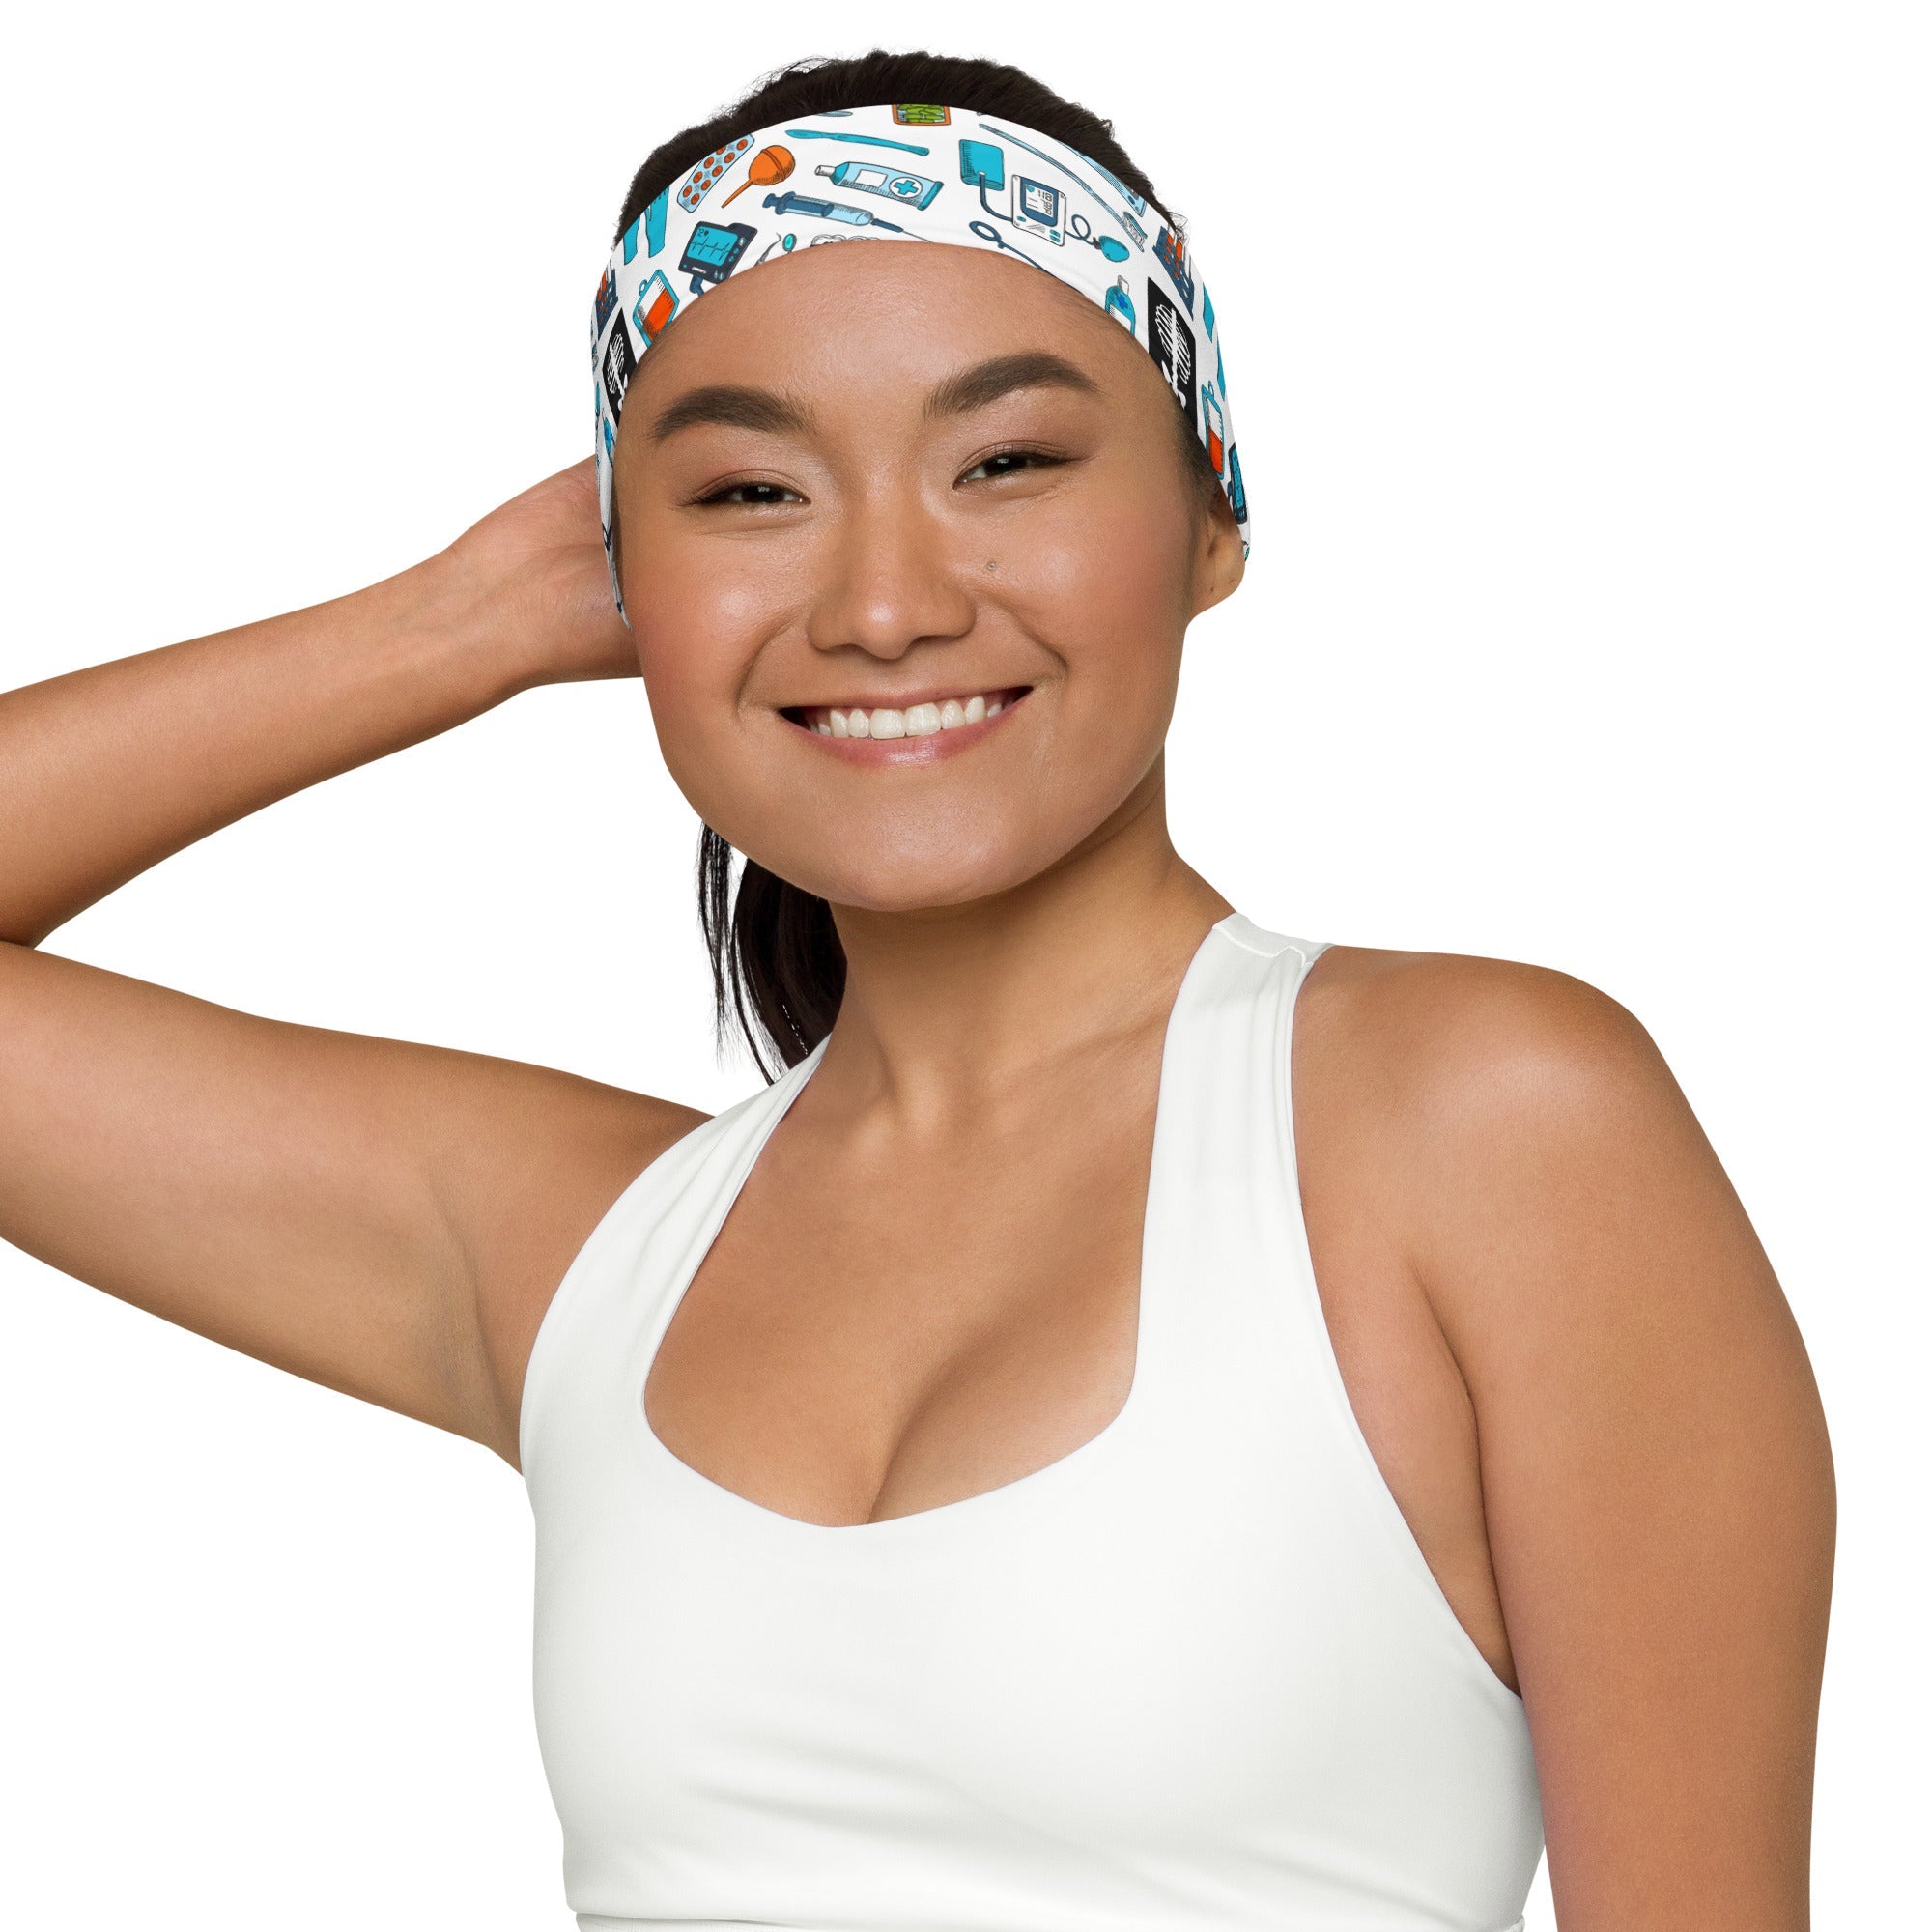 Stretchy Headbands - Medical accessory pattern - White and Blue